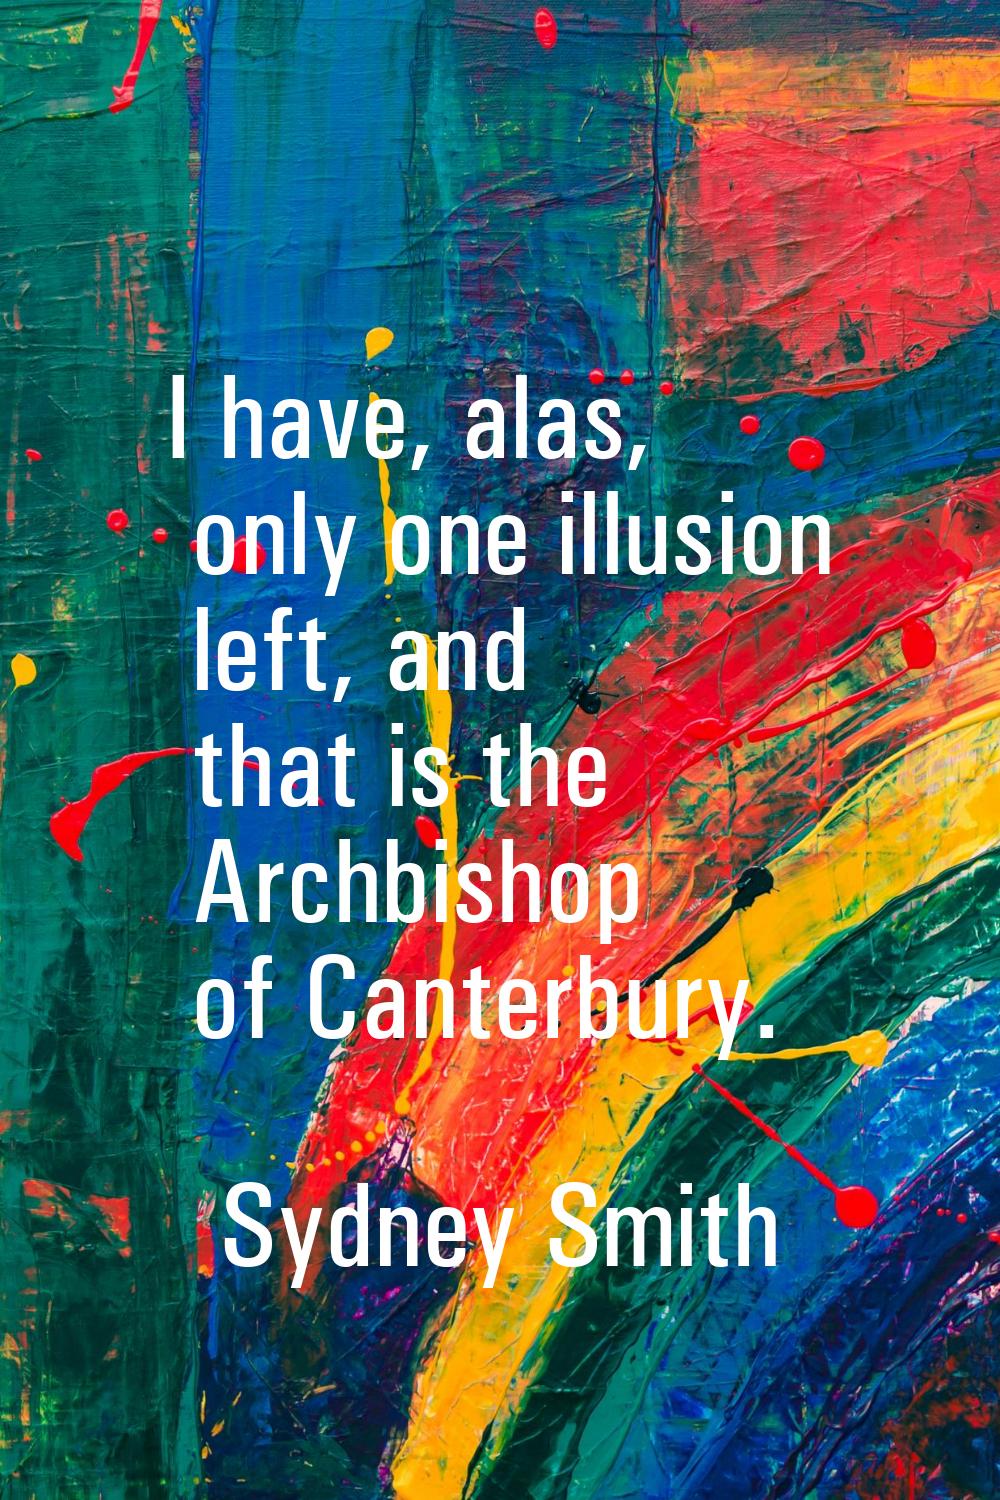 I have, alas, only one illusion left, and that is the Archbishop of Canterbury.